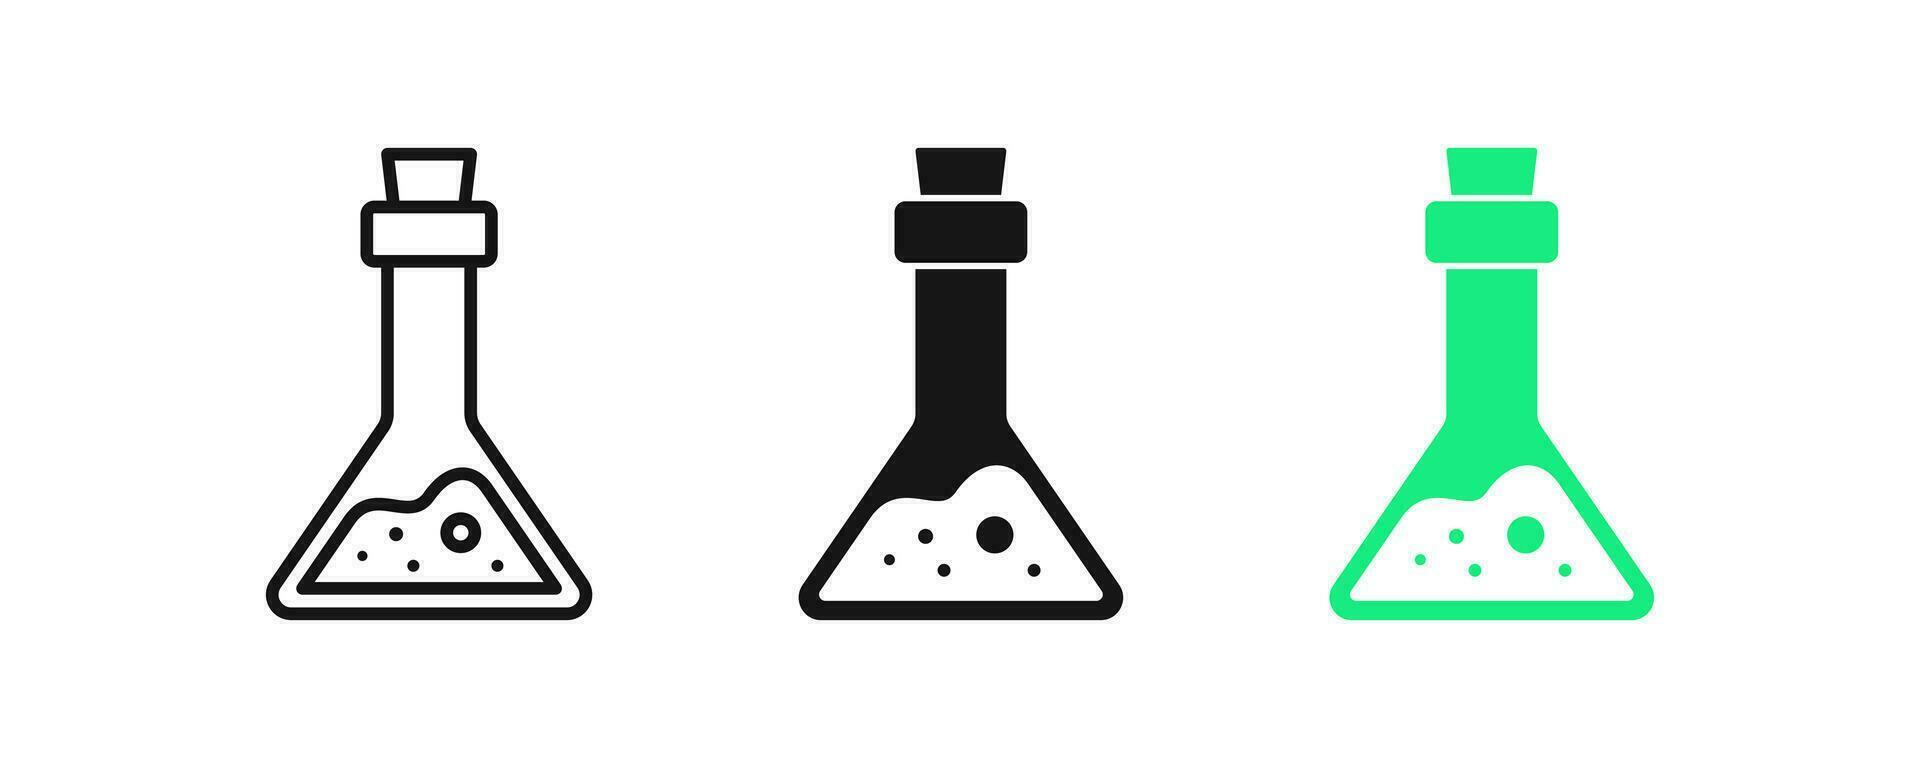 Lab flask icon. Chemical beaker symbol. Laboratory experiment signs. Chemistry science symbols. Medical equipment icons. Black, green color. Vector sign.